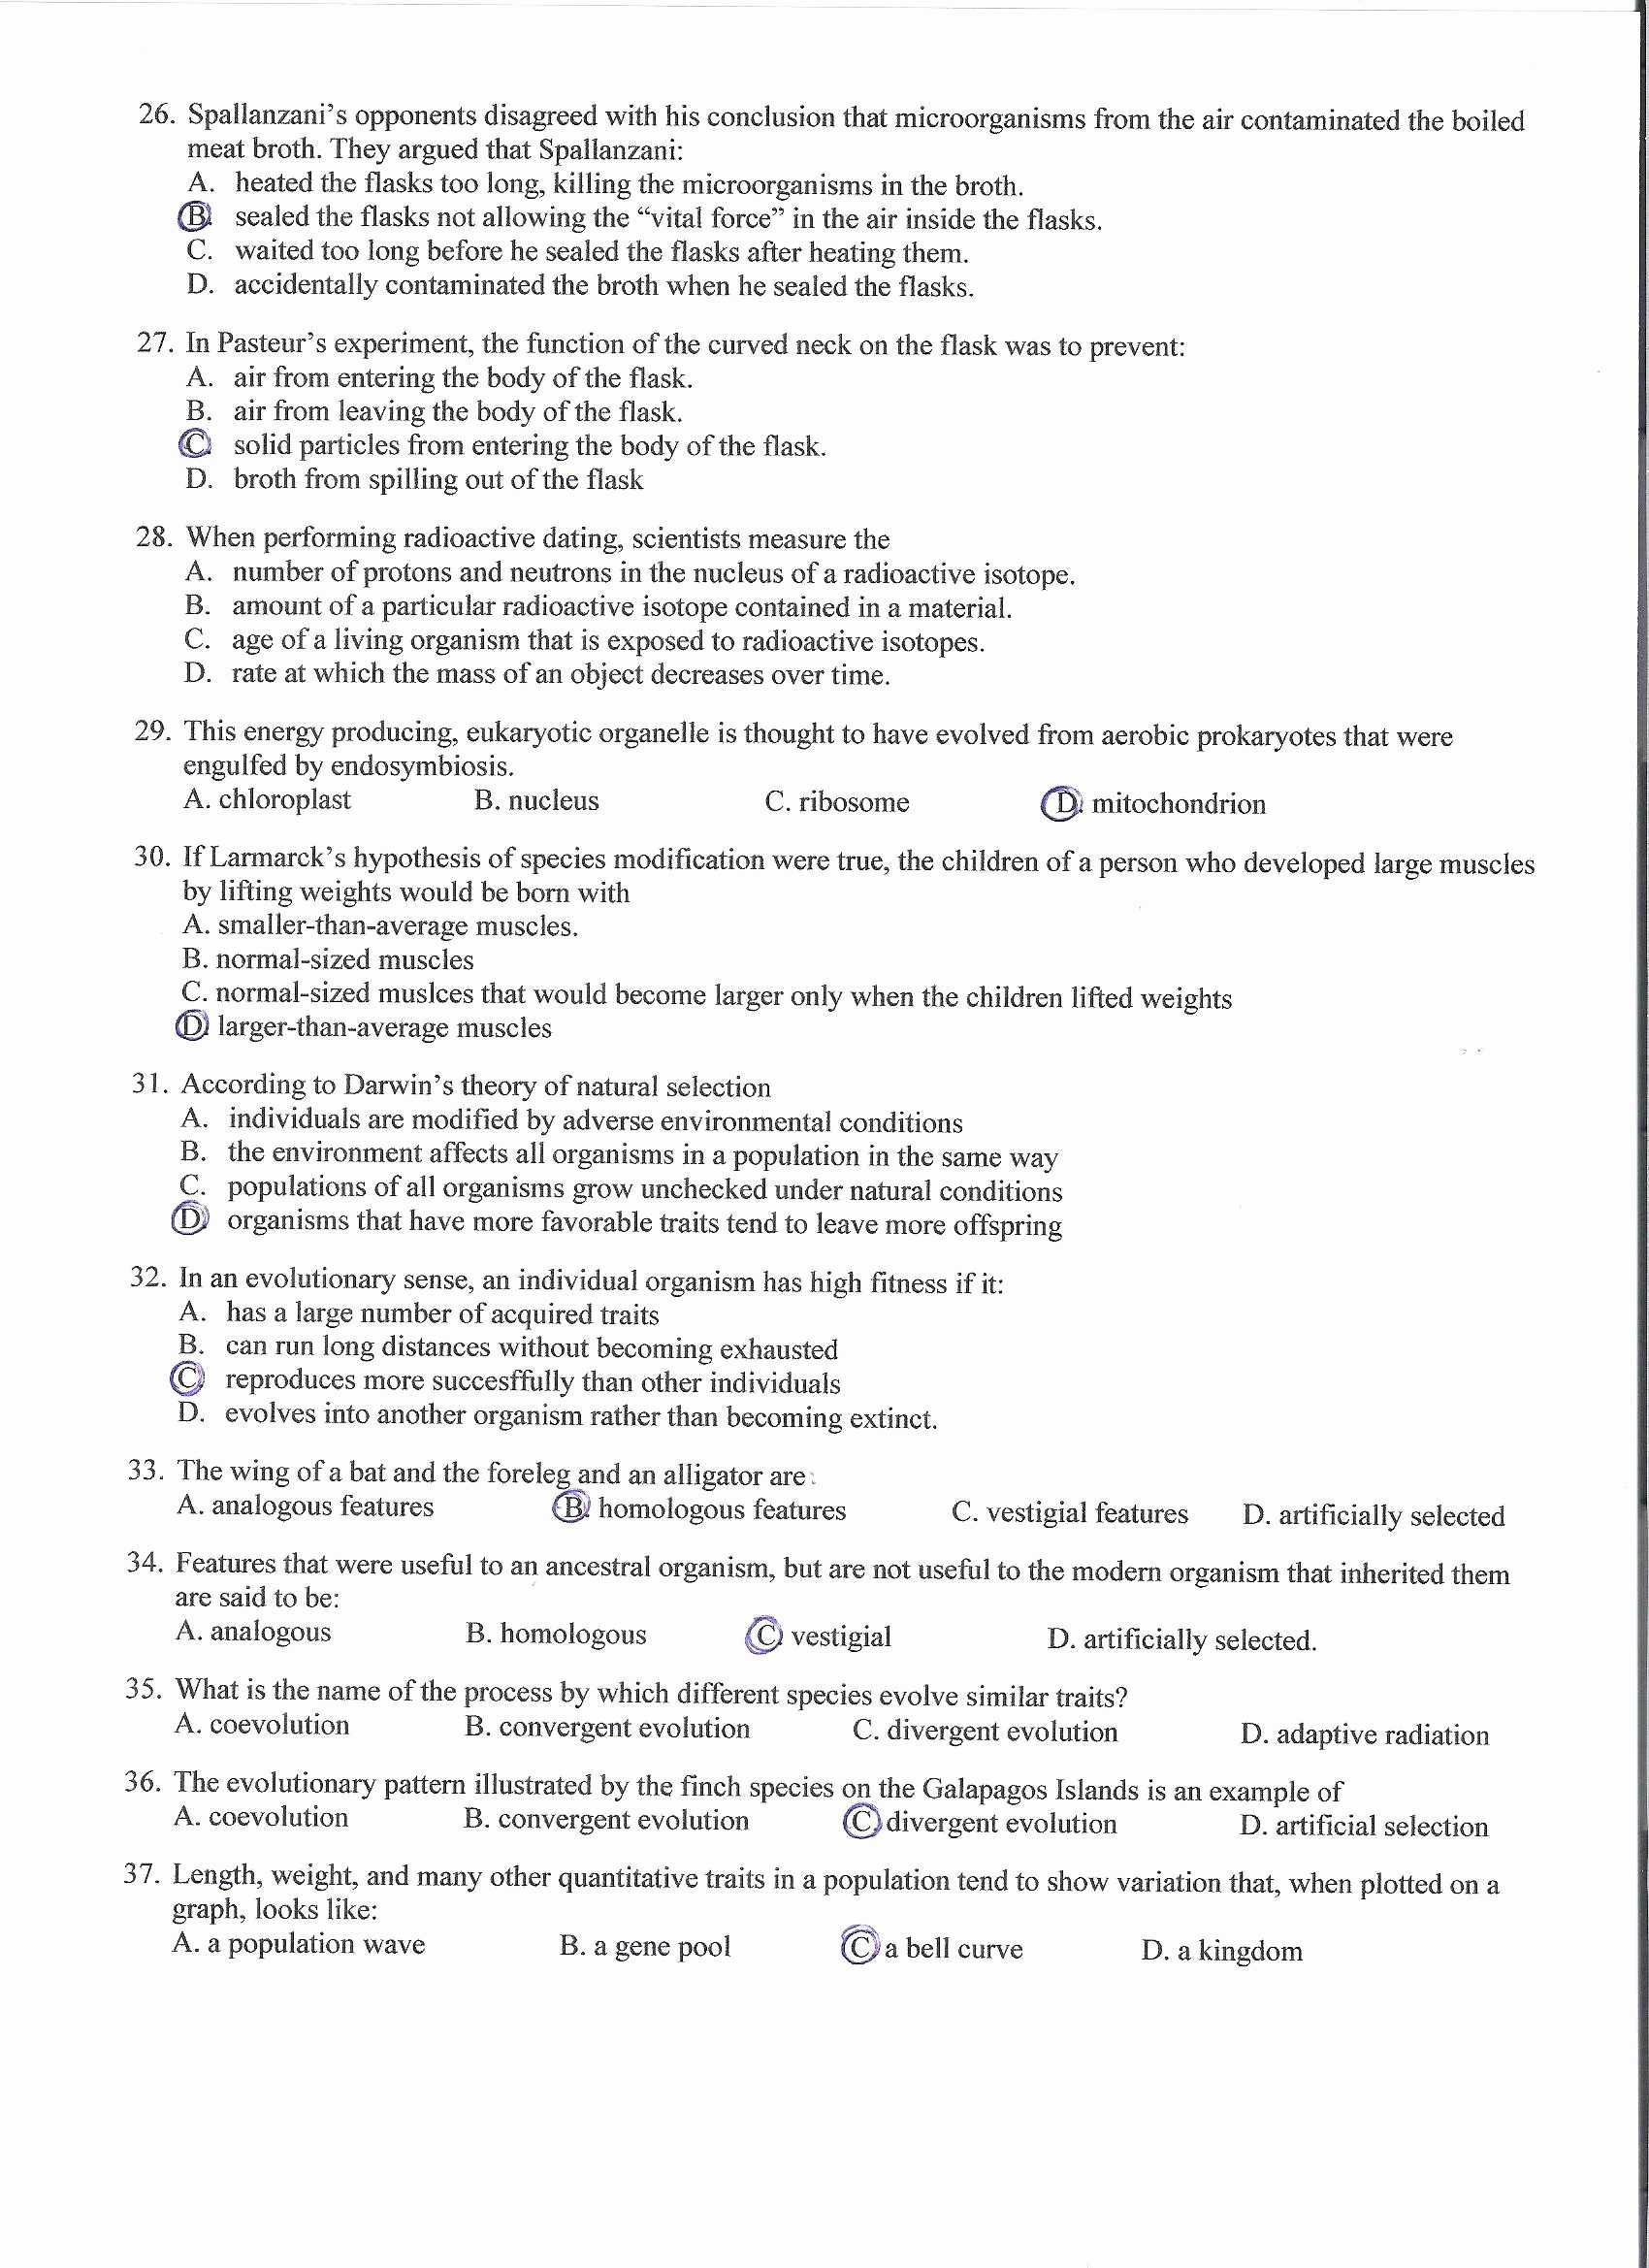 Cellular Transport Worksheet Section A Cell Membrane Structure Answer Key Along with 23 Cell Transport Worksheet Answers Document Design Ideas